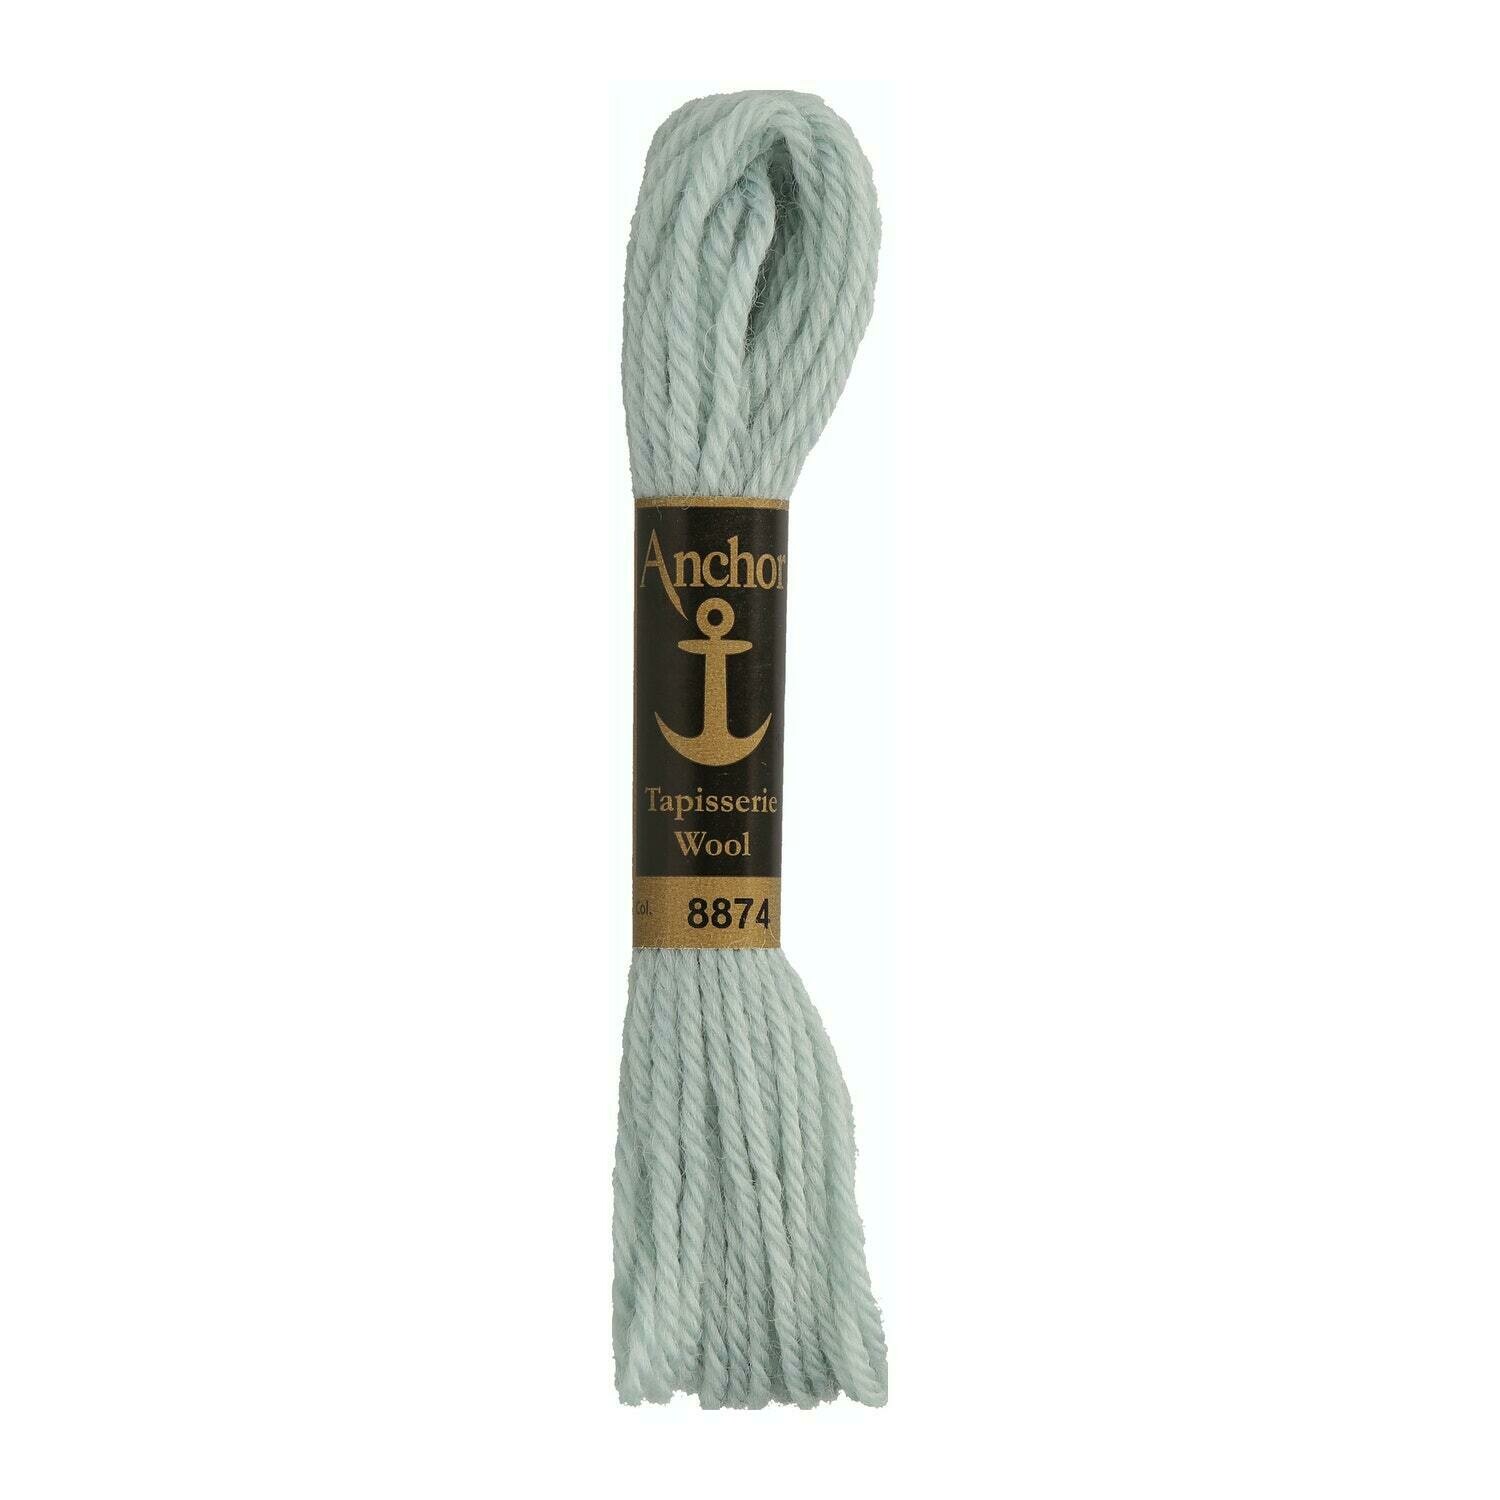 Anchor Tapisserie Wool #08874